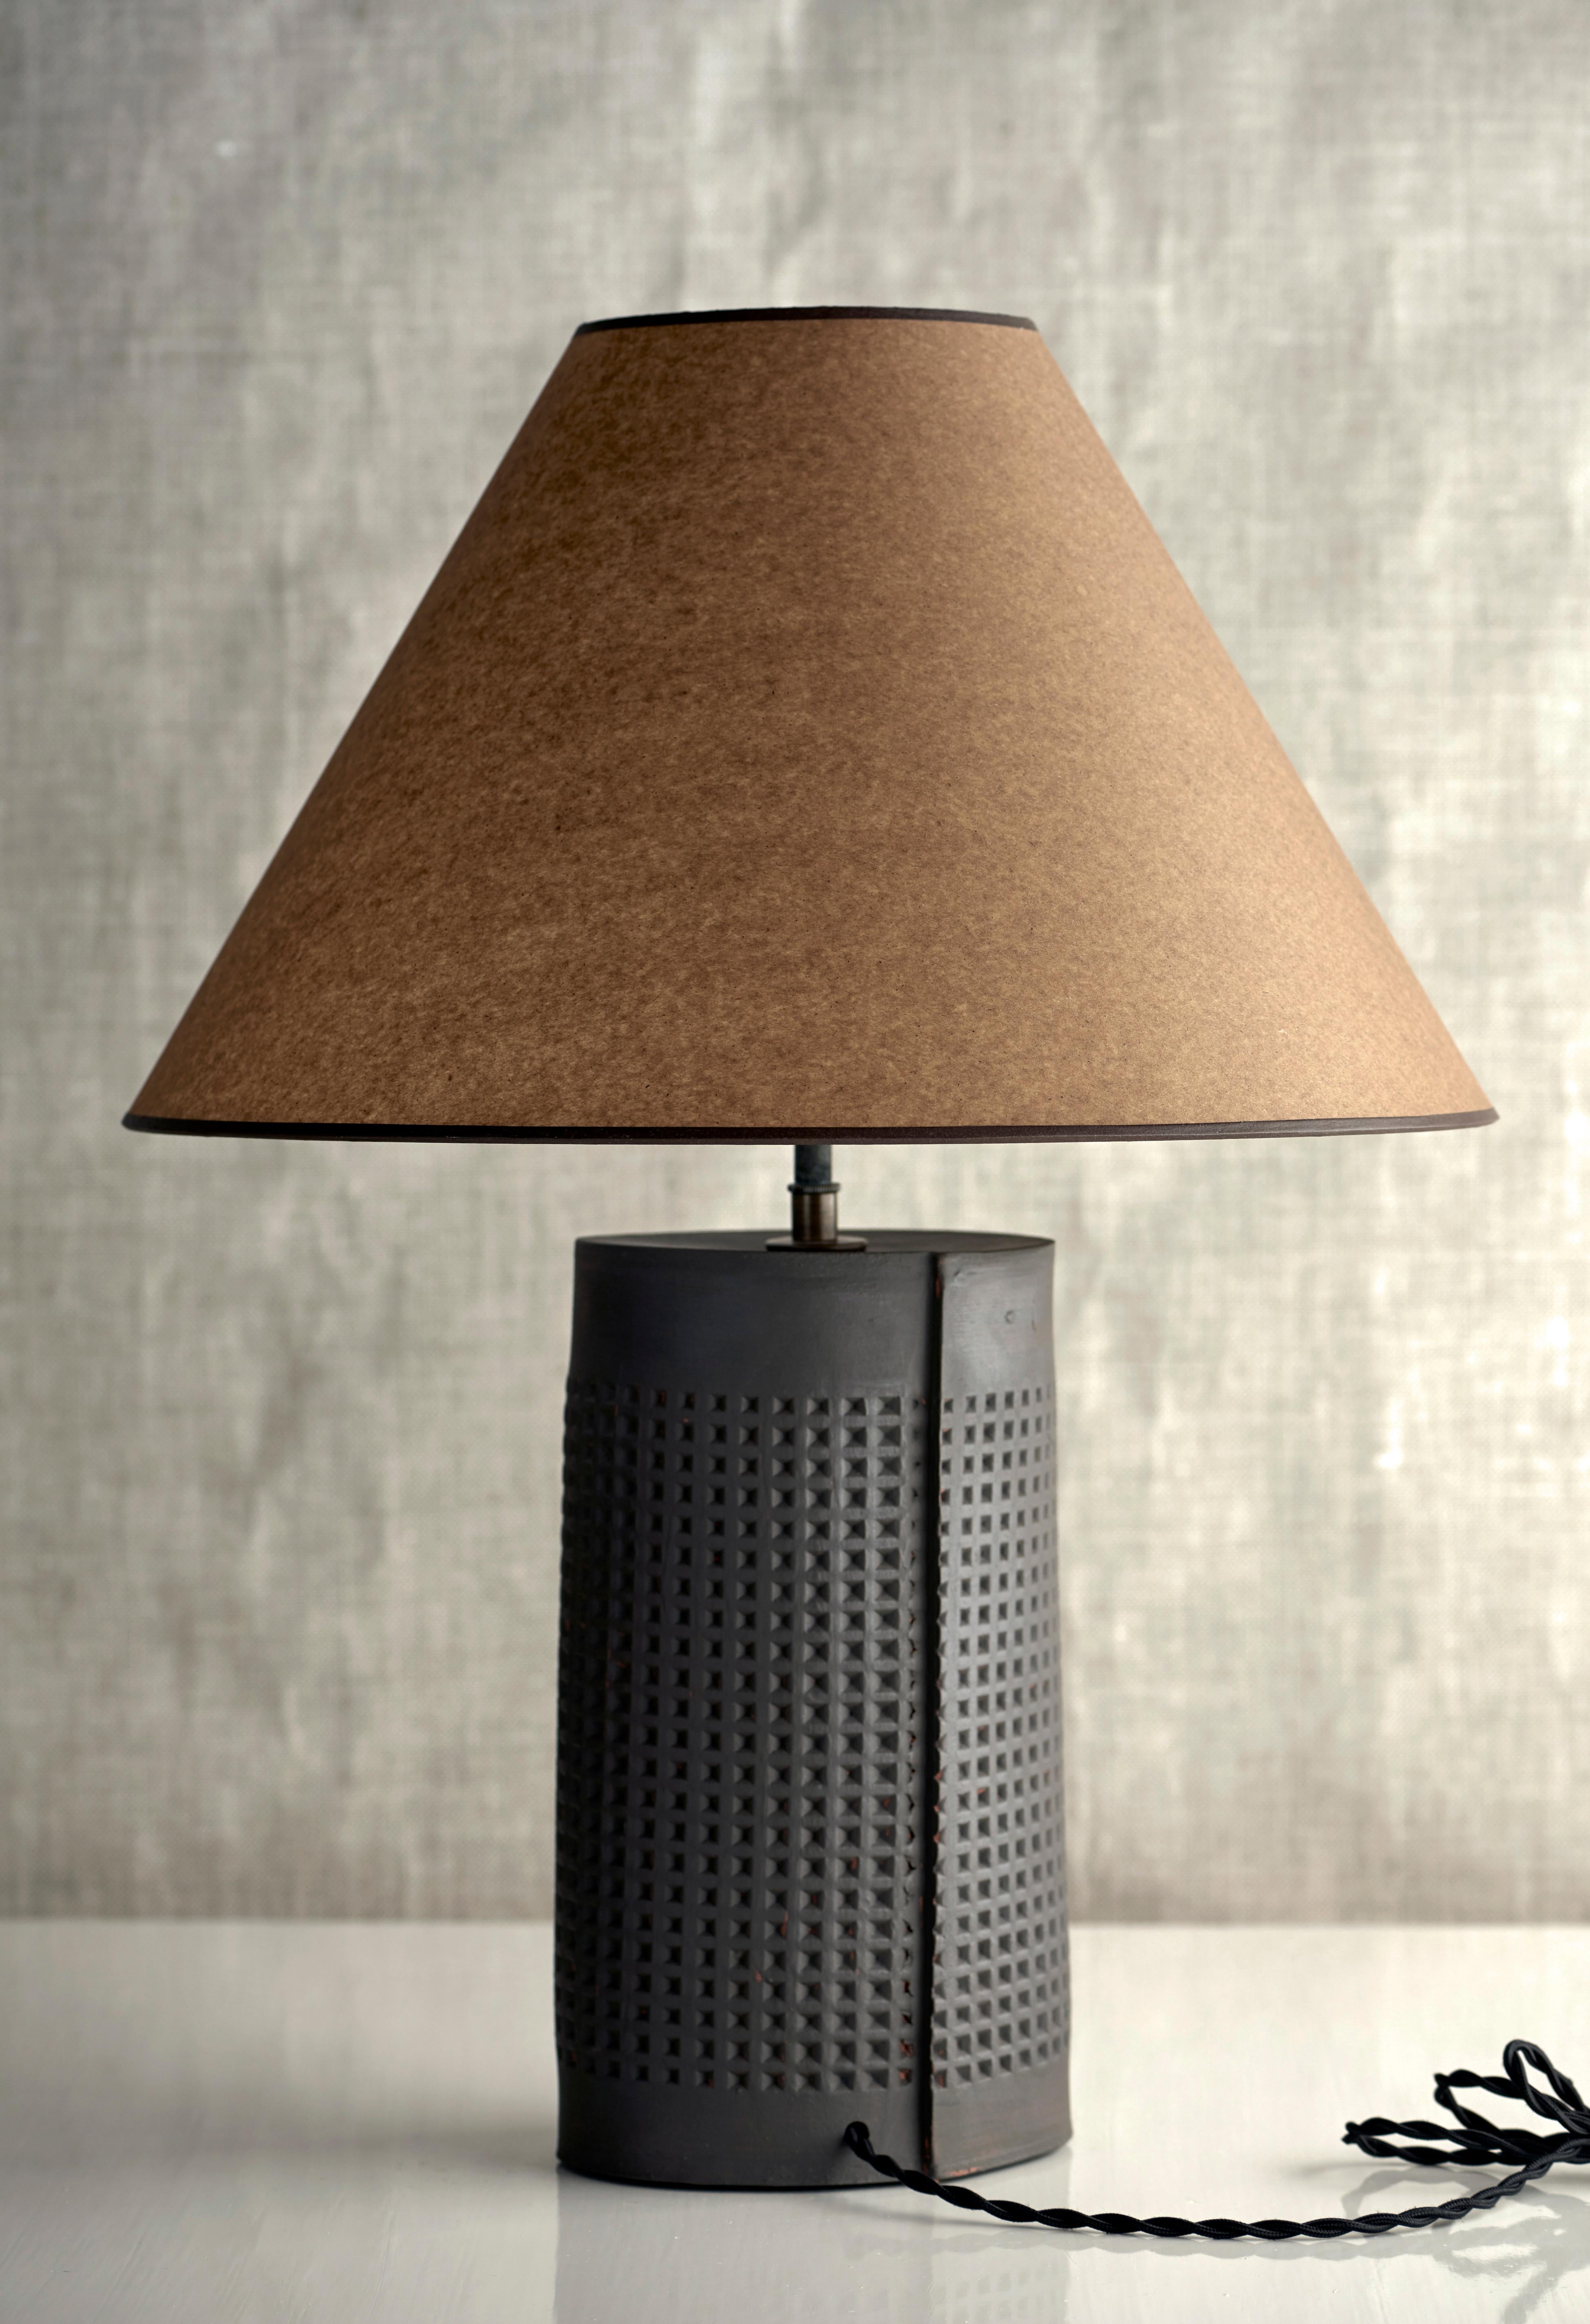 Description

Handmade stoneware slab construction. Lamps are individually crafted and one of a kind.

Finish

Matte black glaze. Antique brass fittings, dimmer switch on socket. Braided black cloth cord and Kraft paper